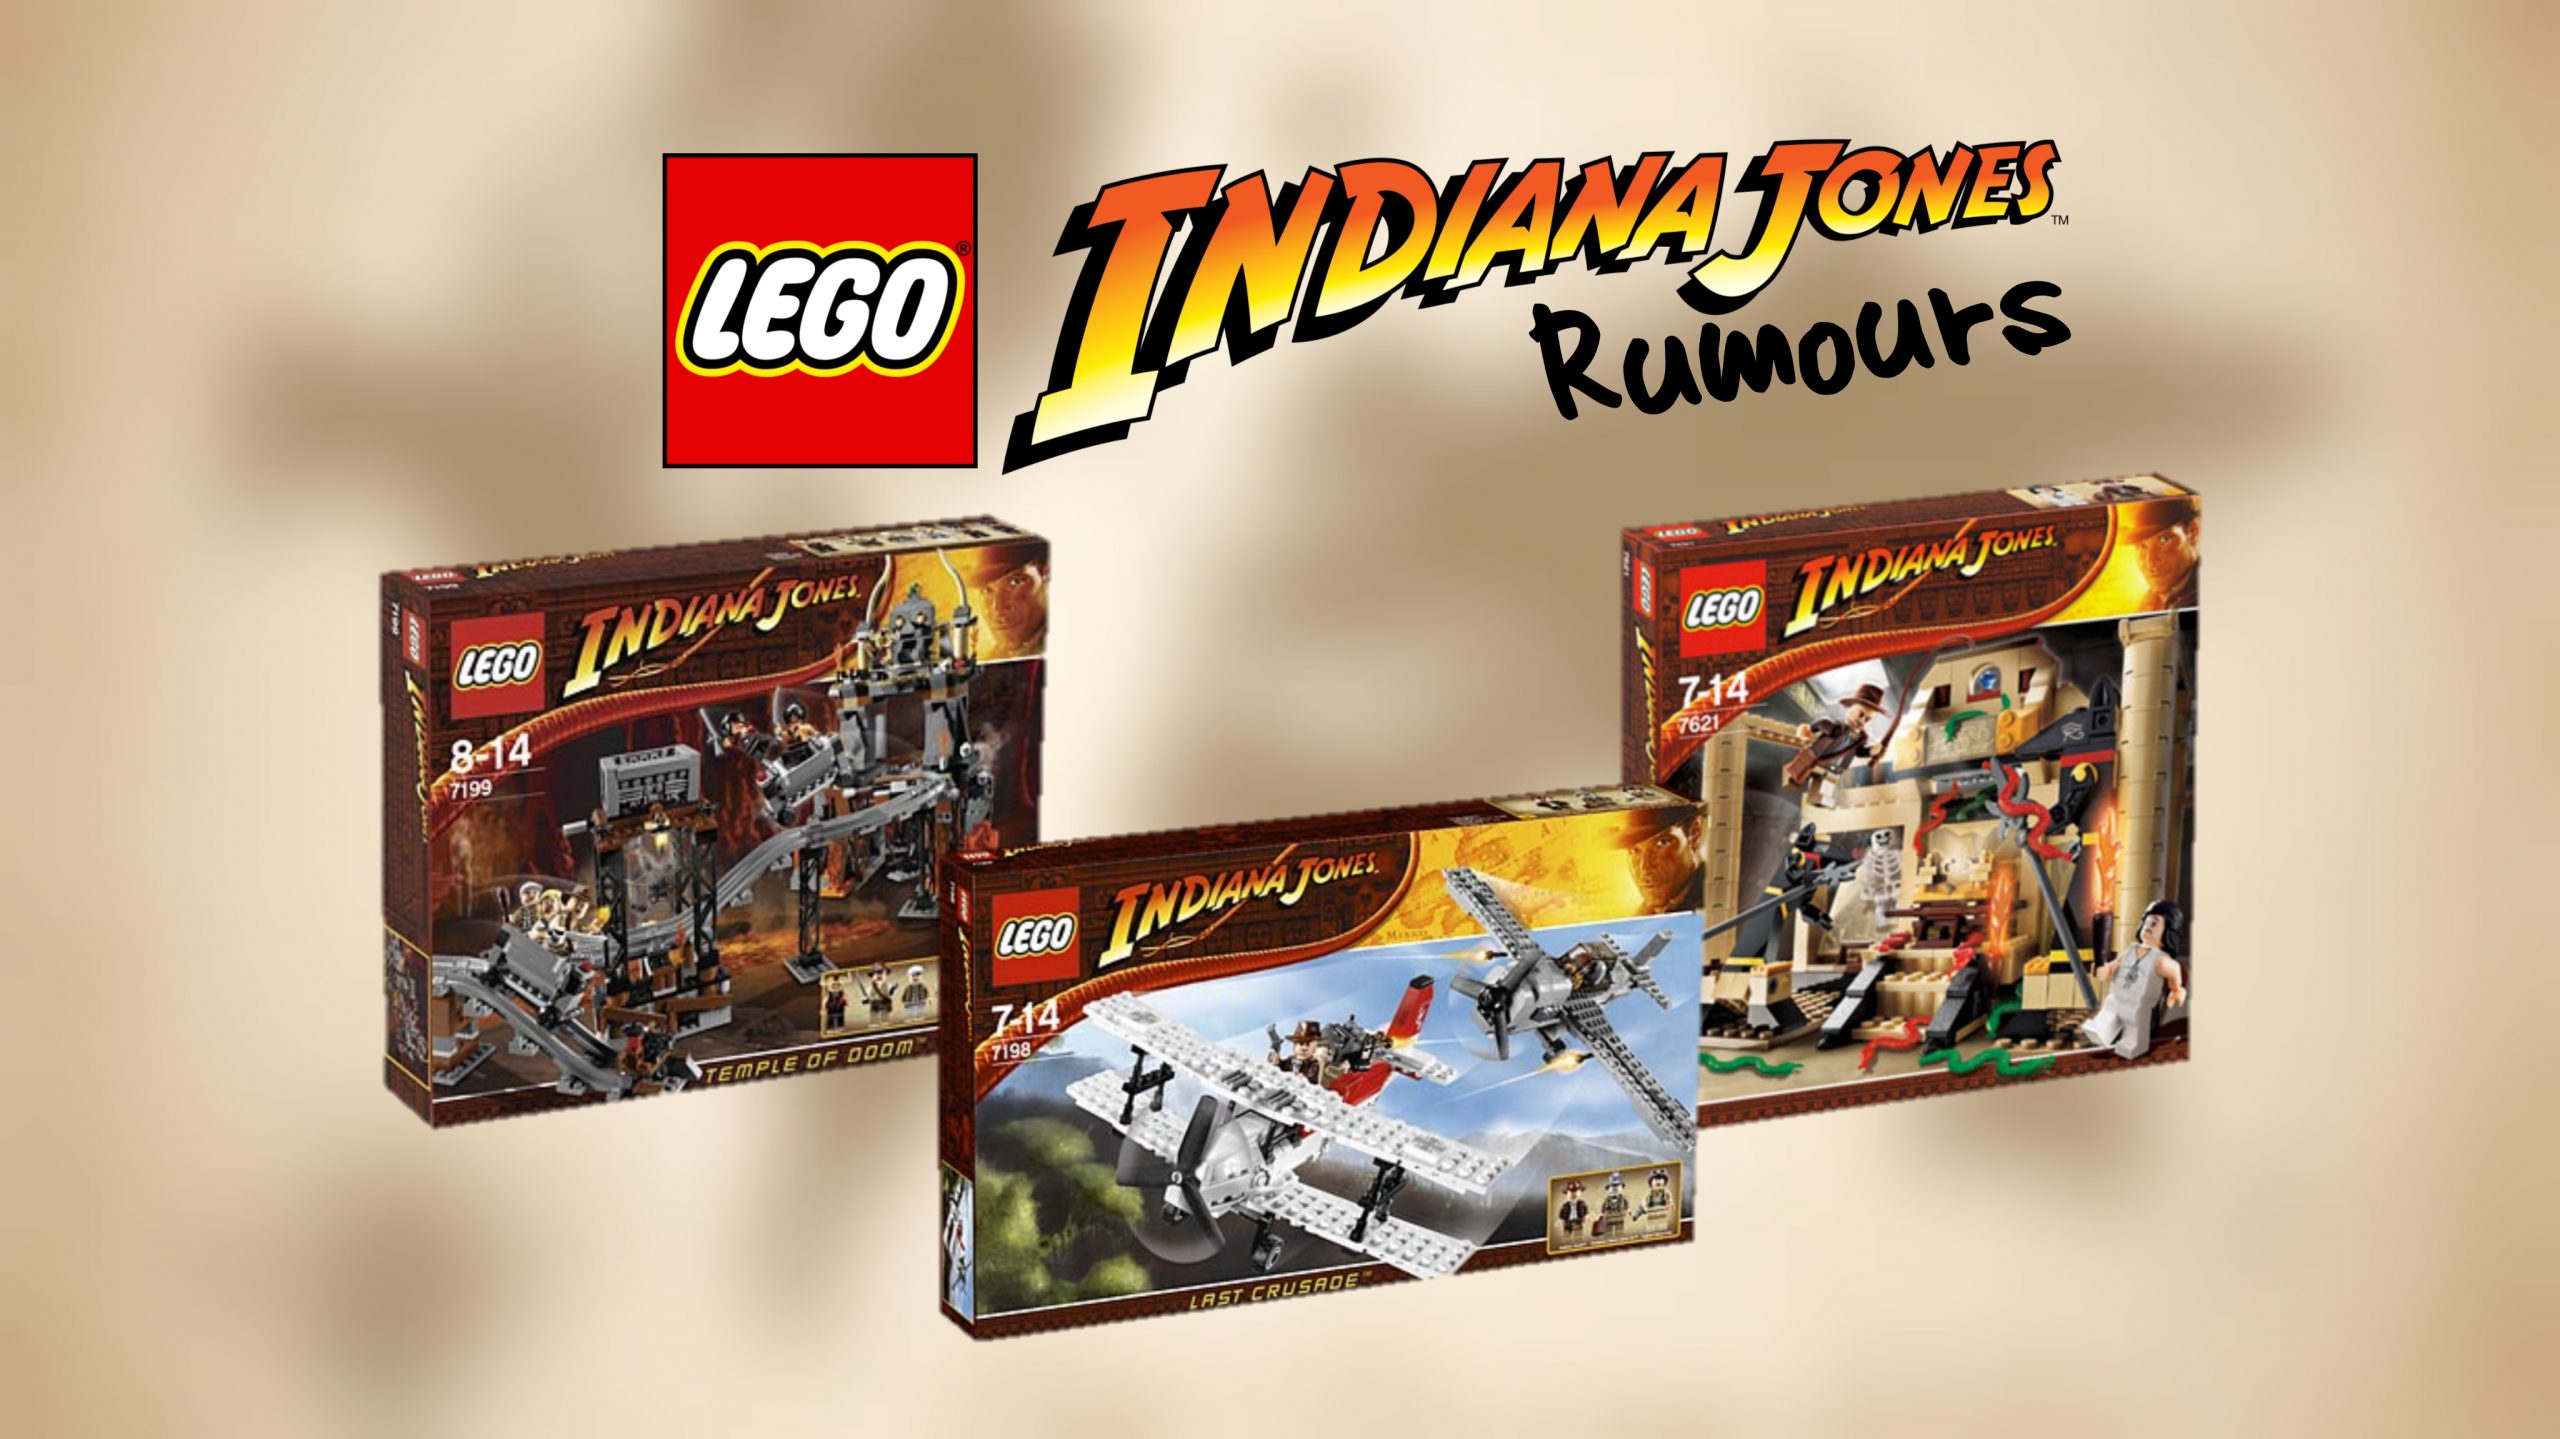 How Many Lego Indiana Jones Sets Are There